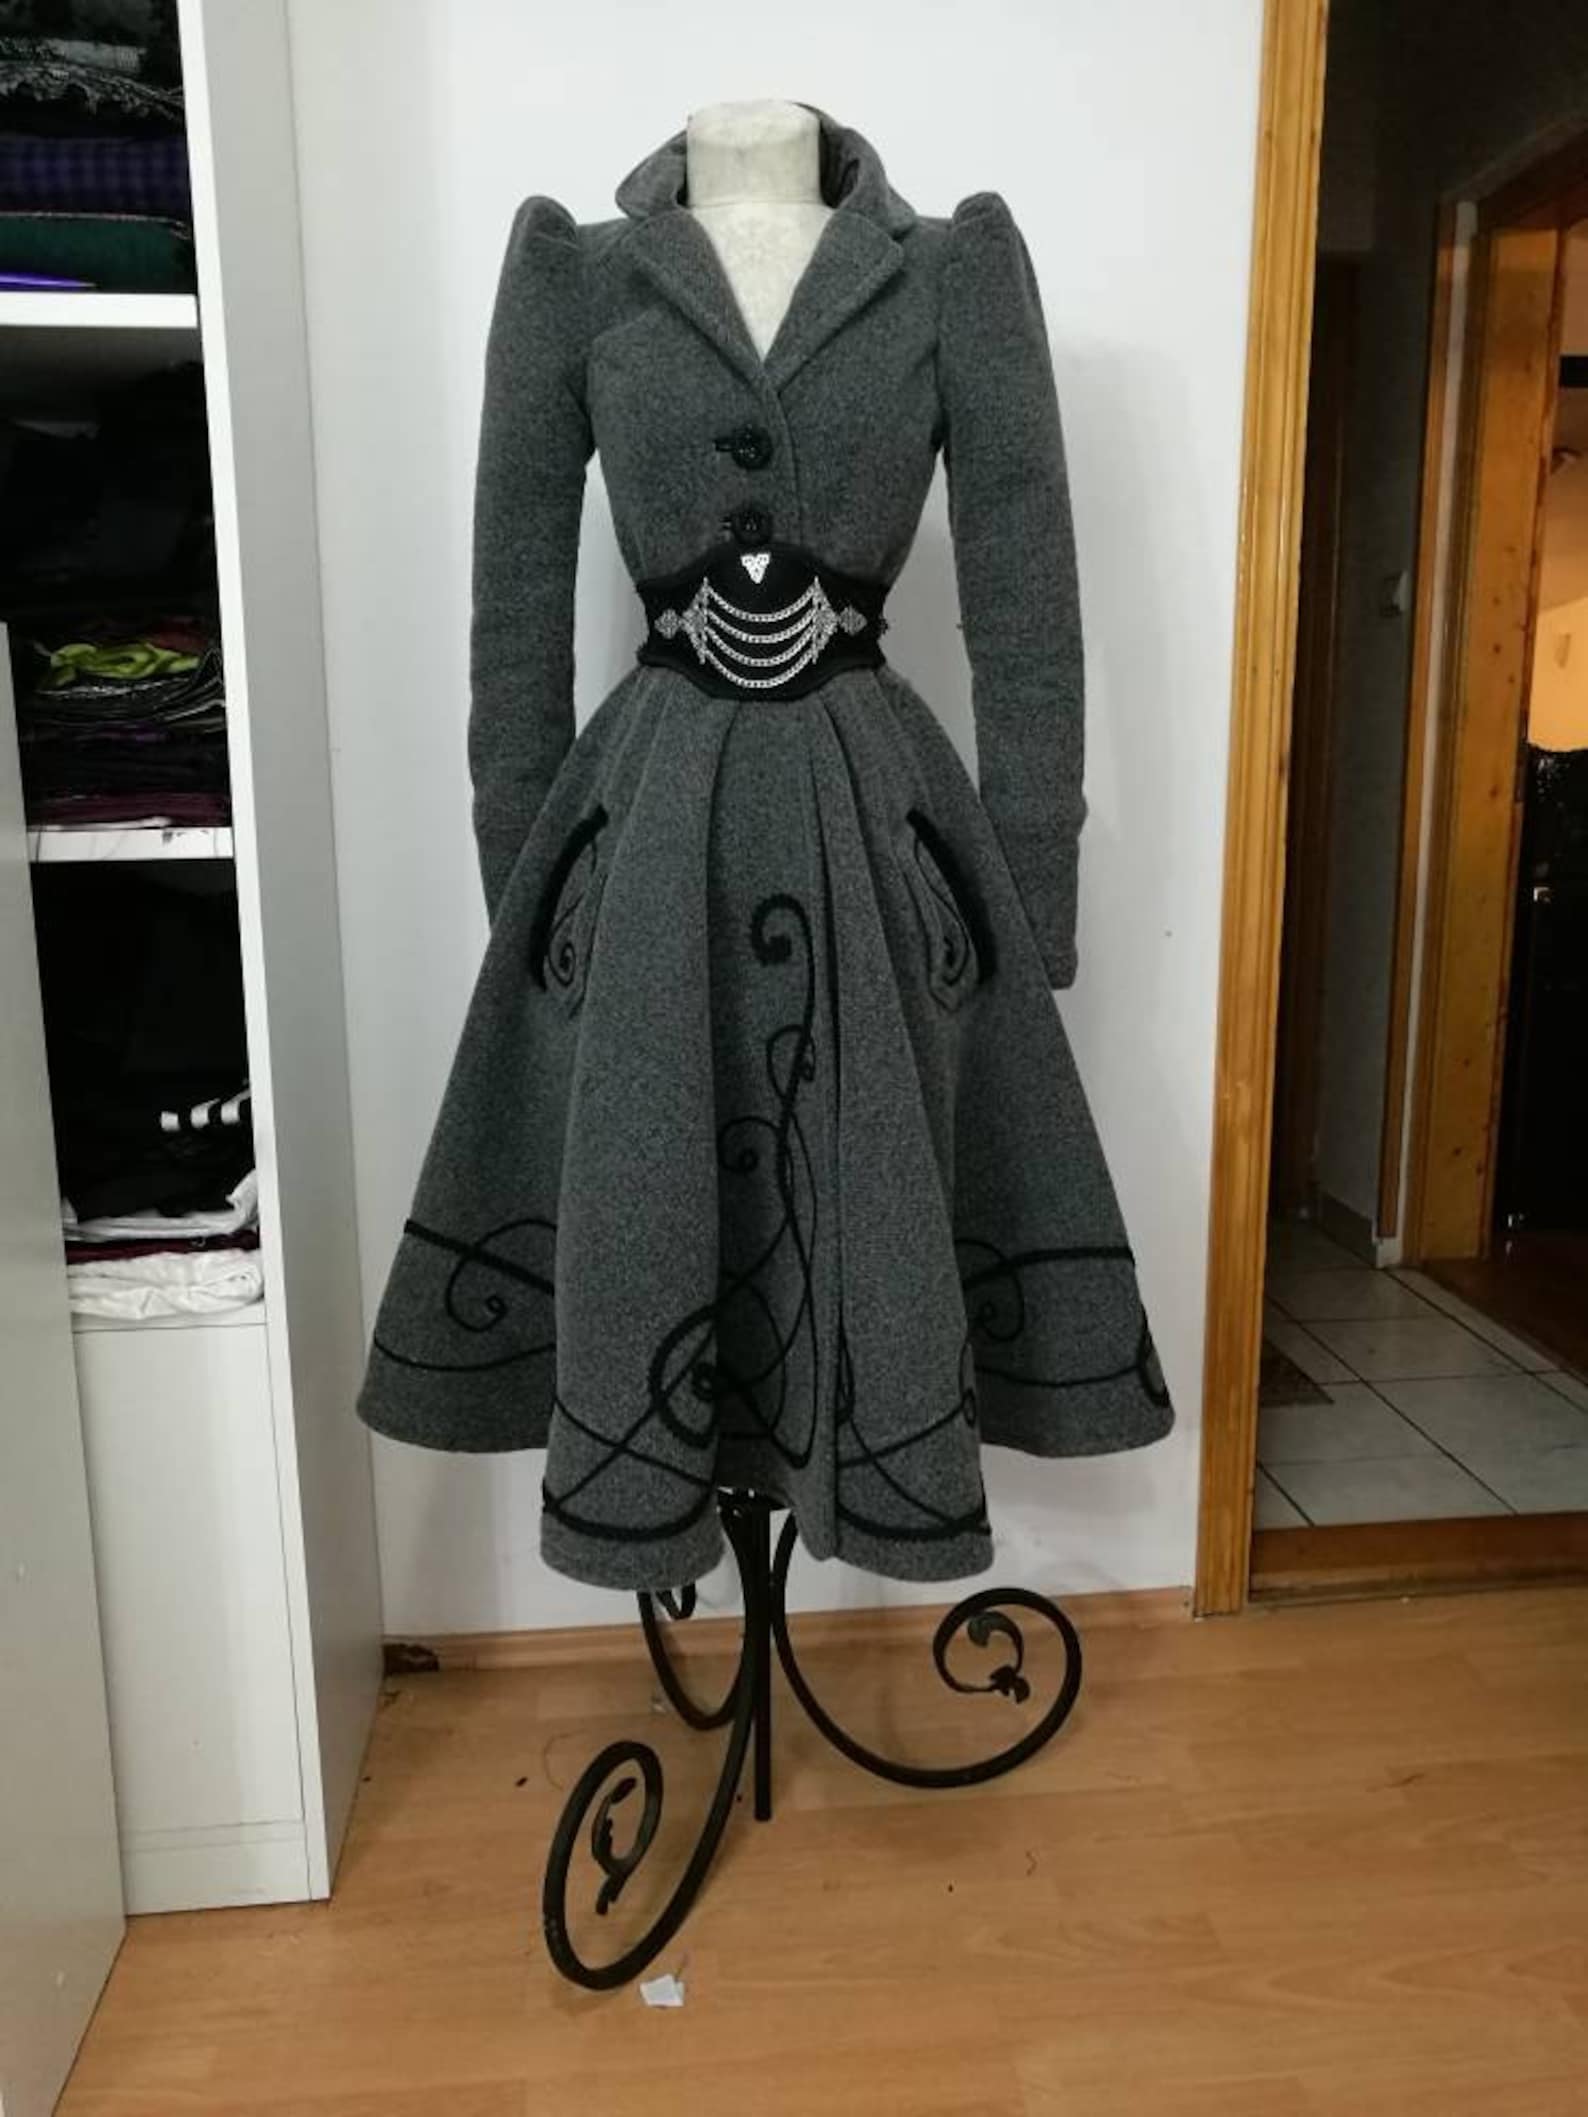 Victorian Era Inspired Wool Coat With Embroidery - Etsy